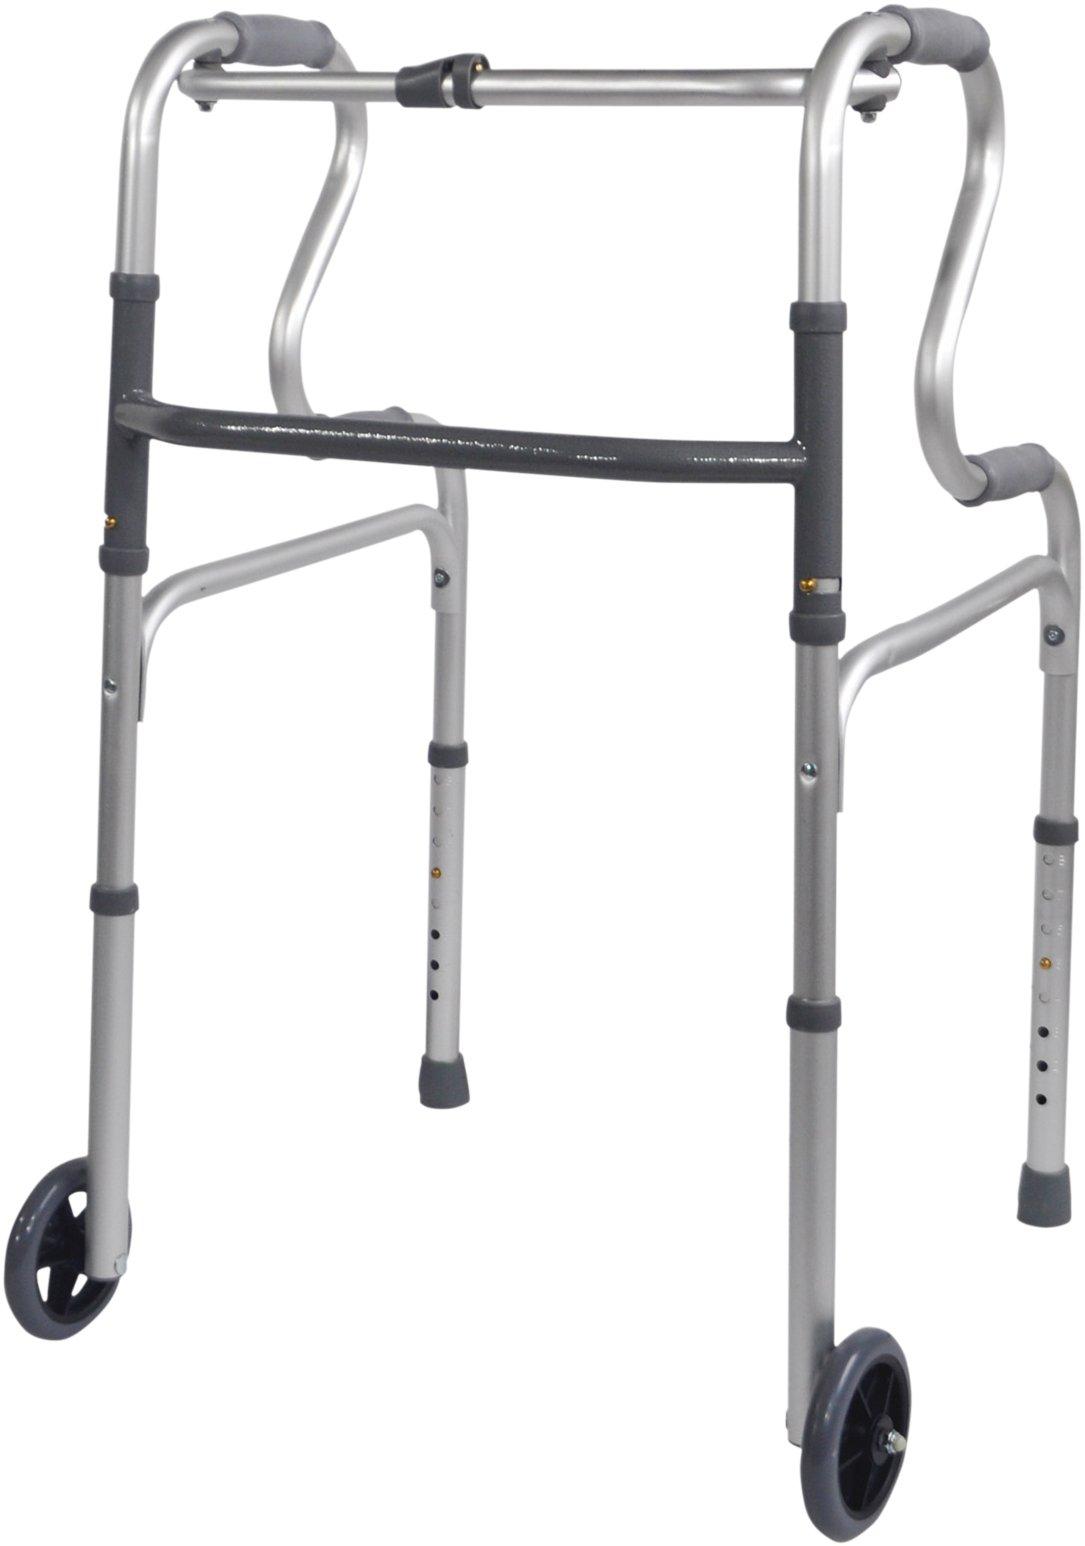 Dual Riser Deluxe Folding Walking Frame With Wheels